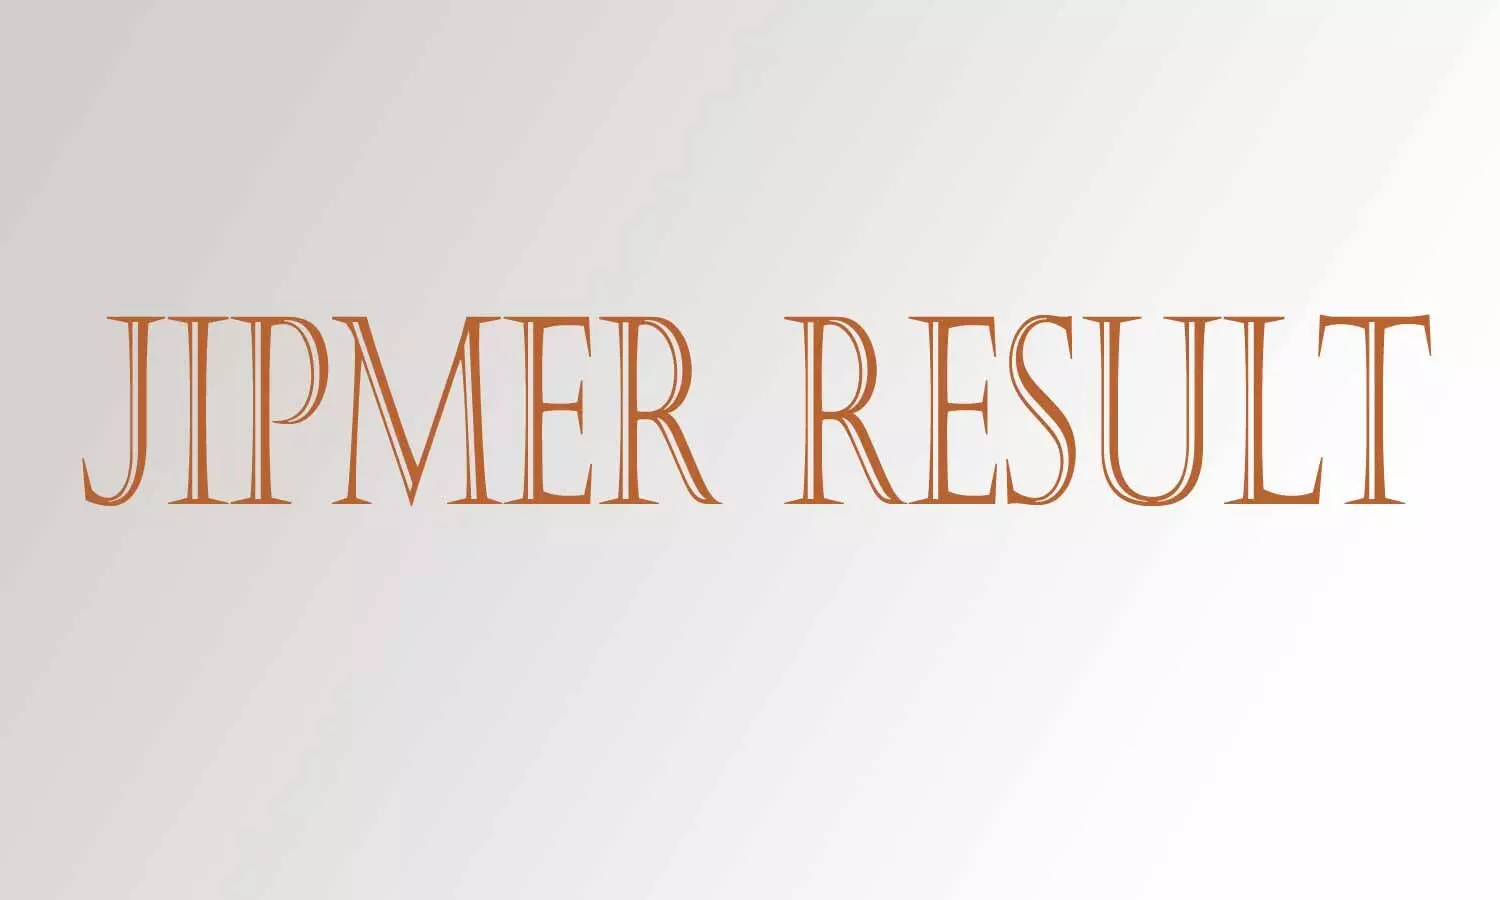 JIPMER releases results of BSc Nursing Final Year Exam August 2020